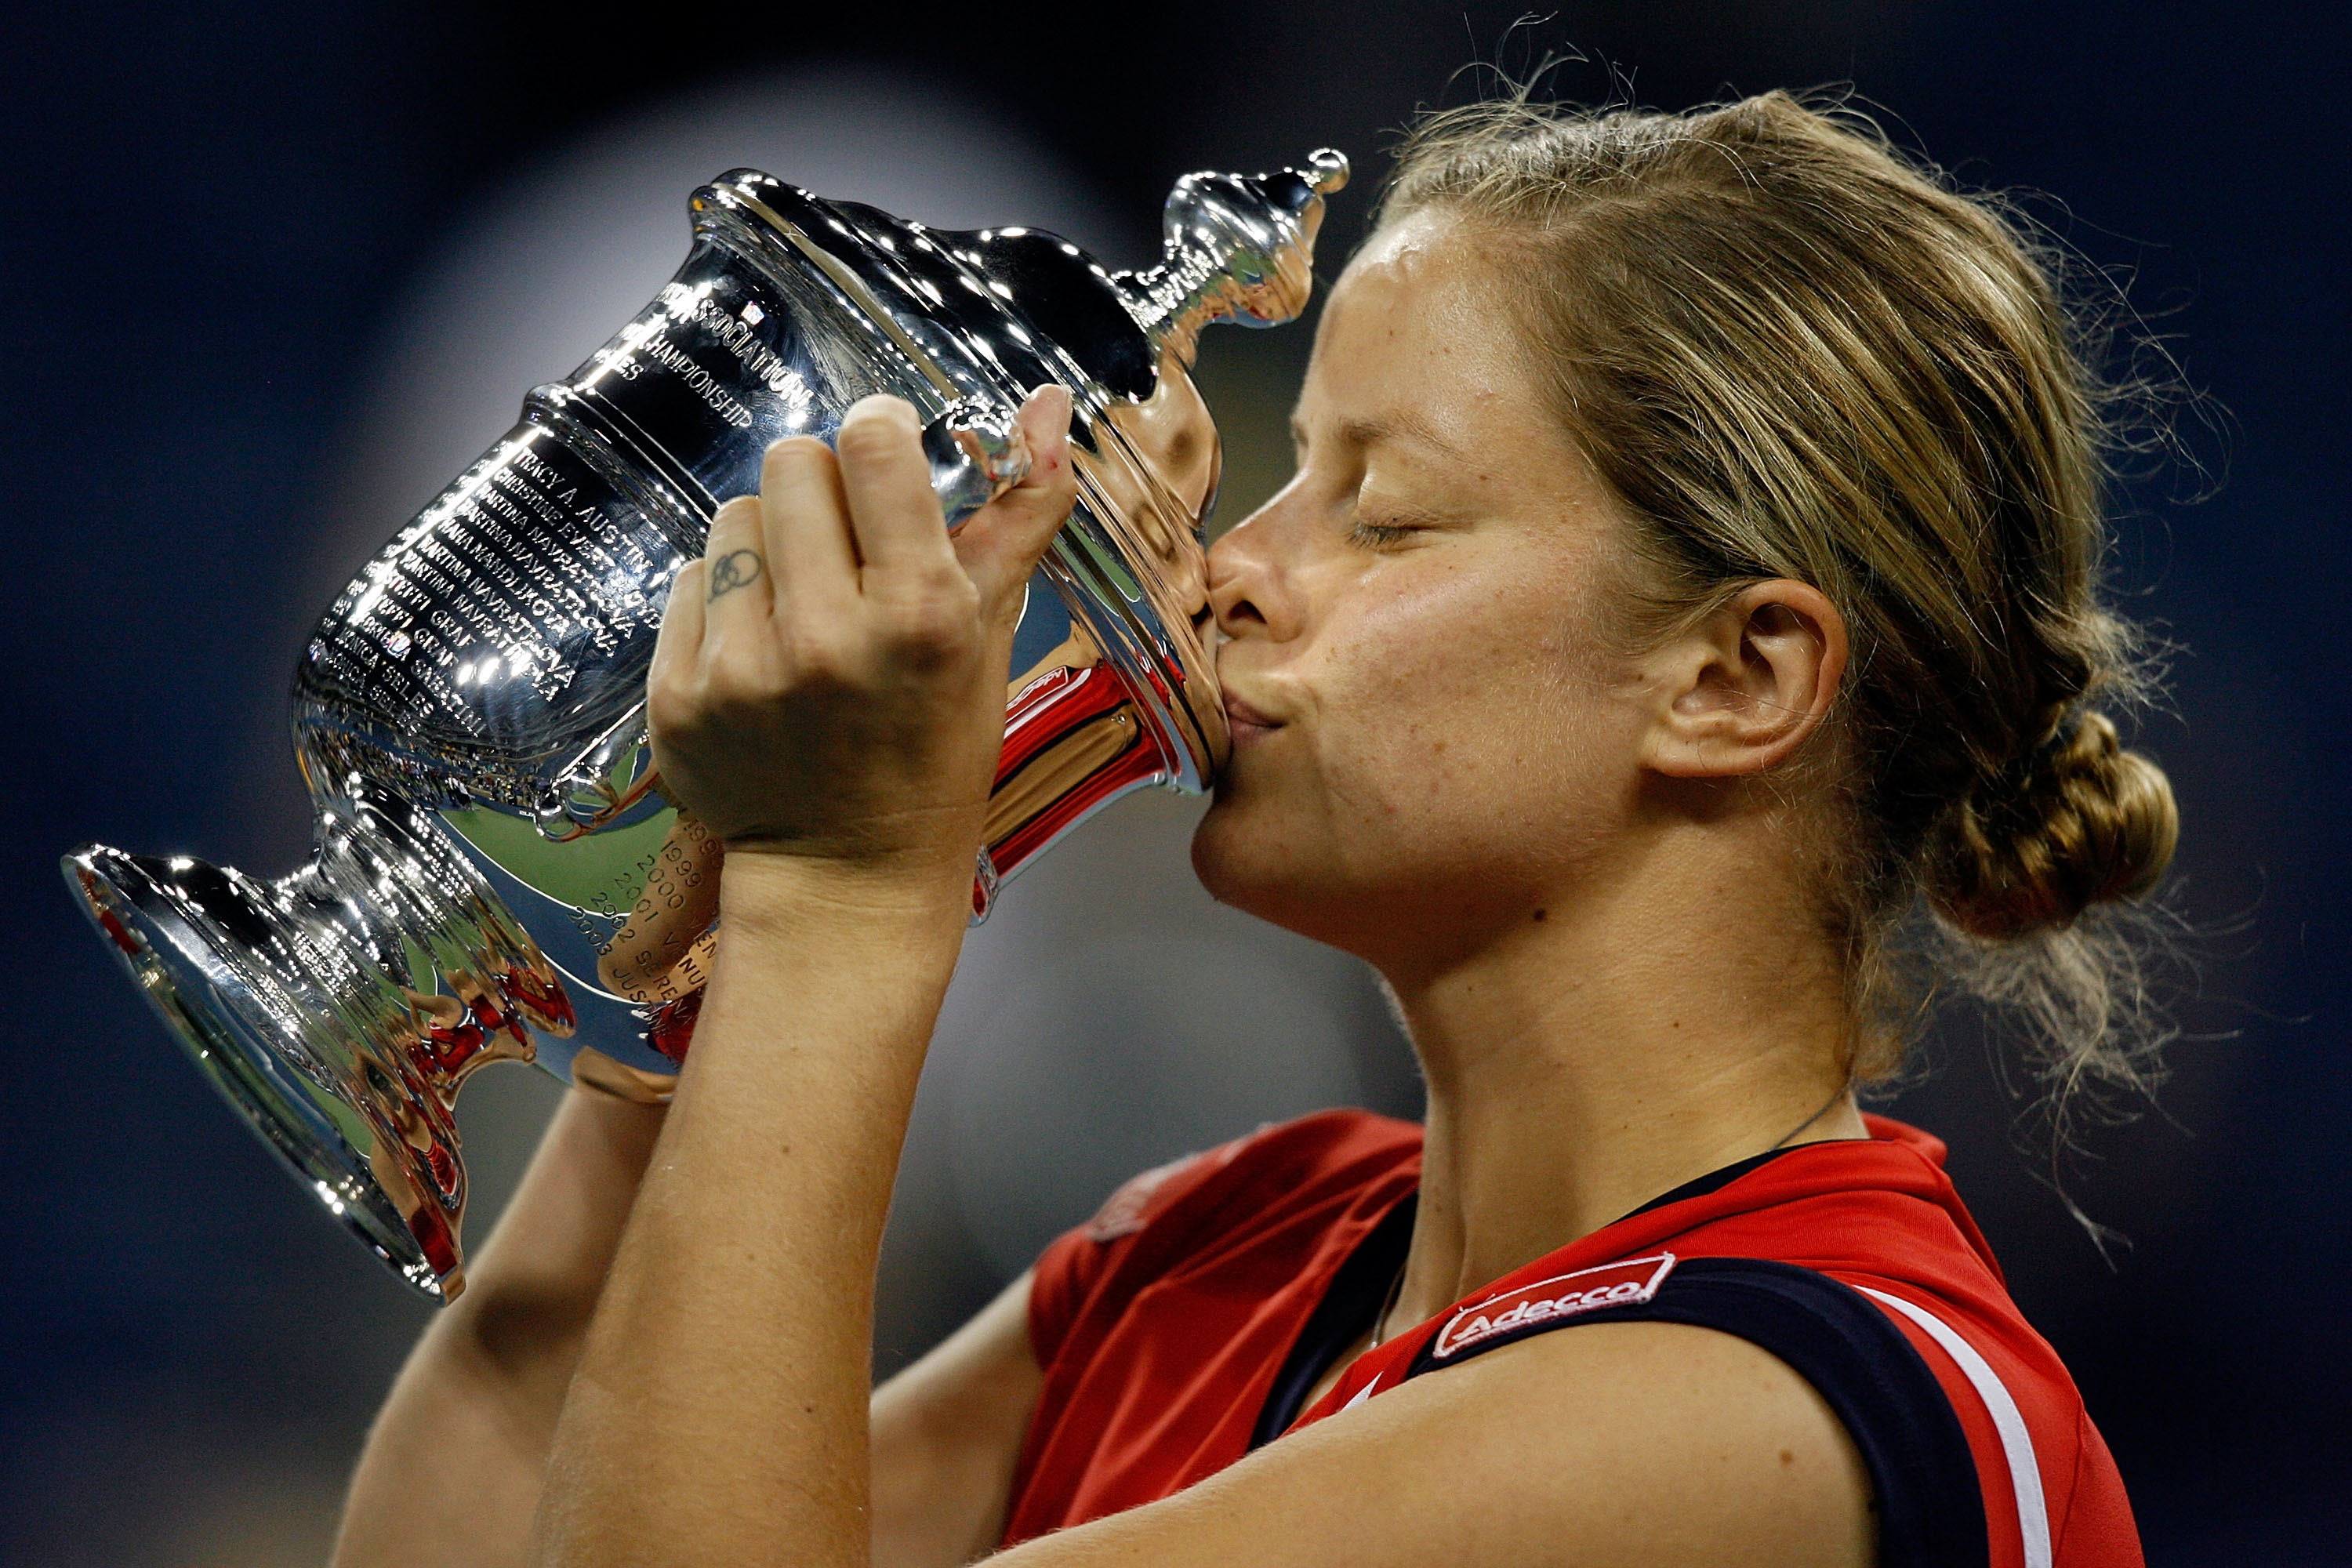 Kim Clijsters Critics have always said Kim Clijsters lacks the killer instinct that defines greats like Monica Seles and Serena Williams. She rose to No. 1 anyway. The Belgian, who won the U.S. Open in 2005 with her well-placed ground strokes, retired in 2007 so she could have a baby. But in March 2009, in the lead-up to an exhibition match at Wimbledon, Clijsters, then 25, announced that she was returning, partly to help cope with the loss of her father, who had died of skin cancer two months earlier.